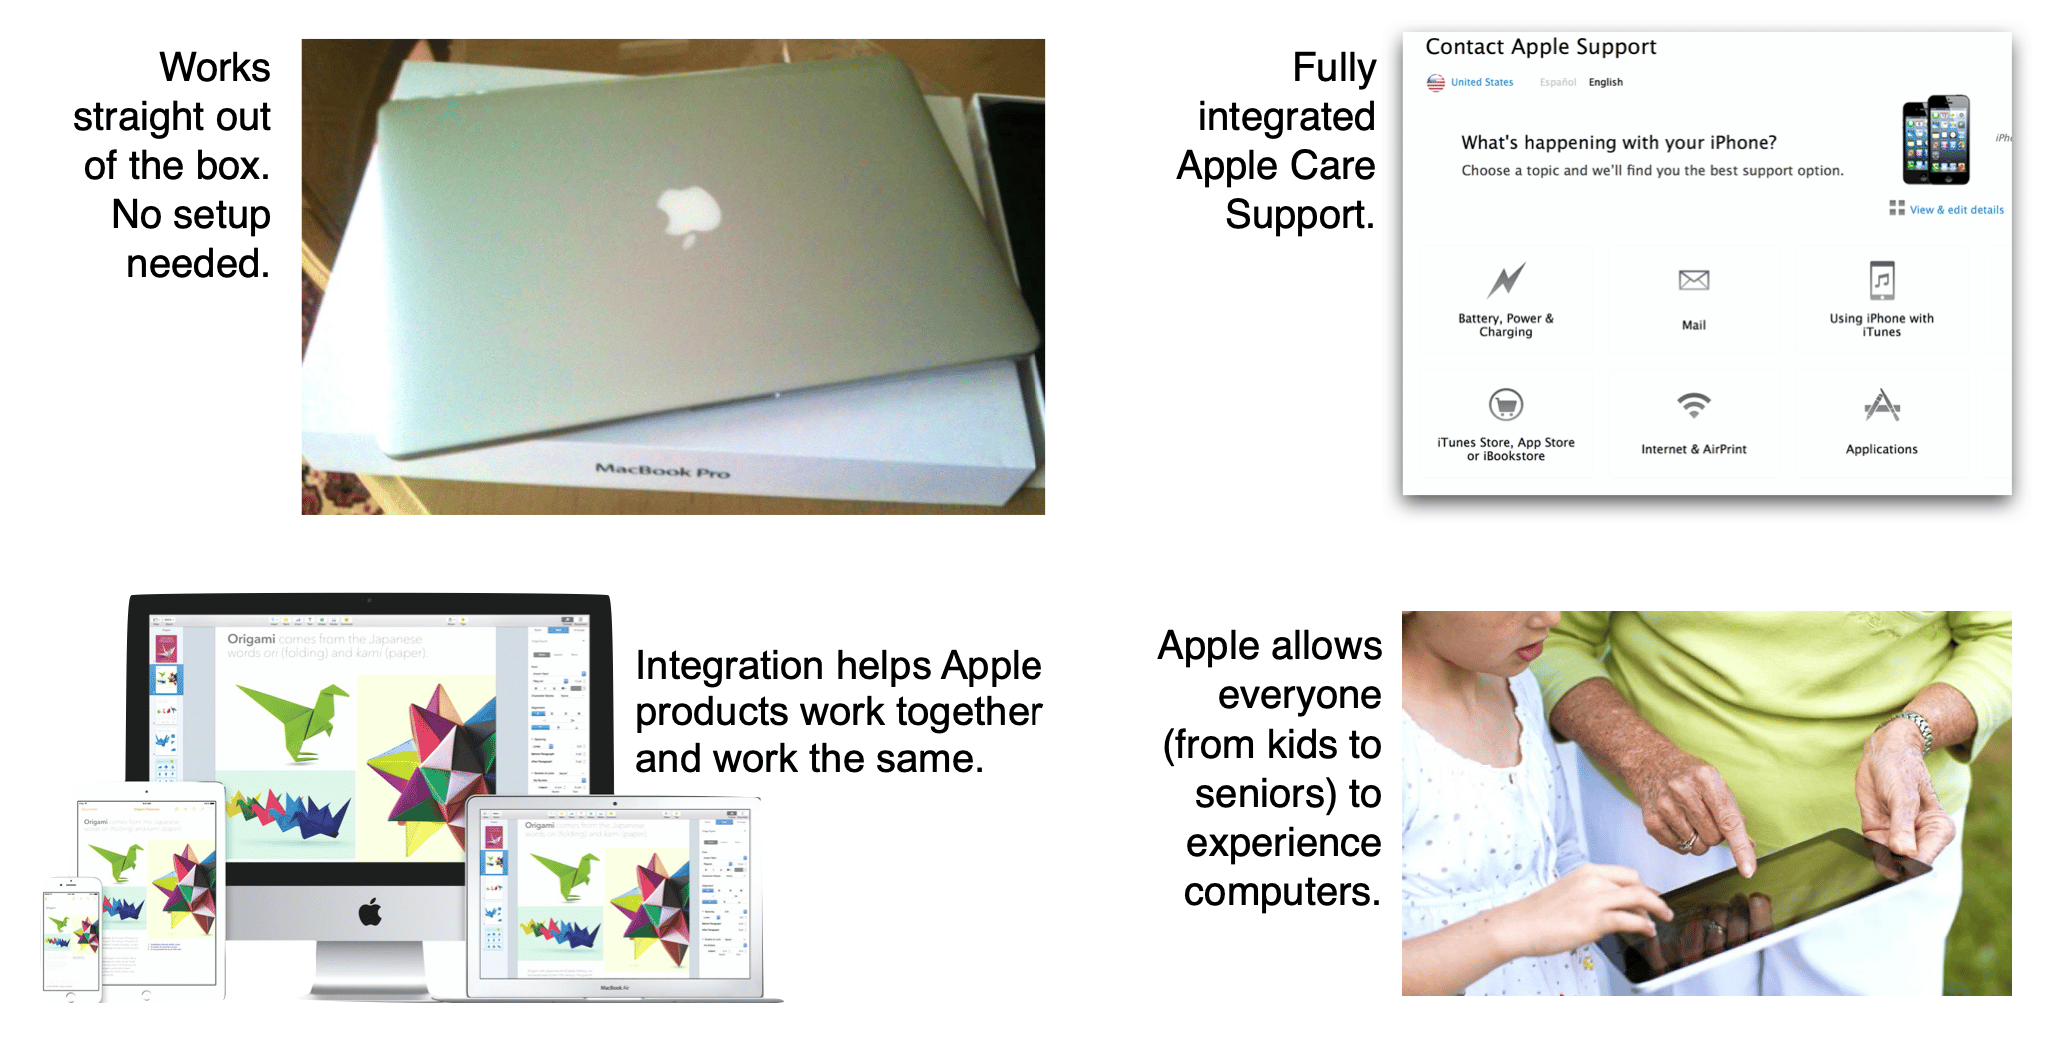 Apple Case Study Consumer Experience